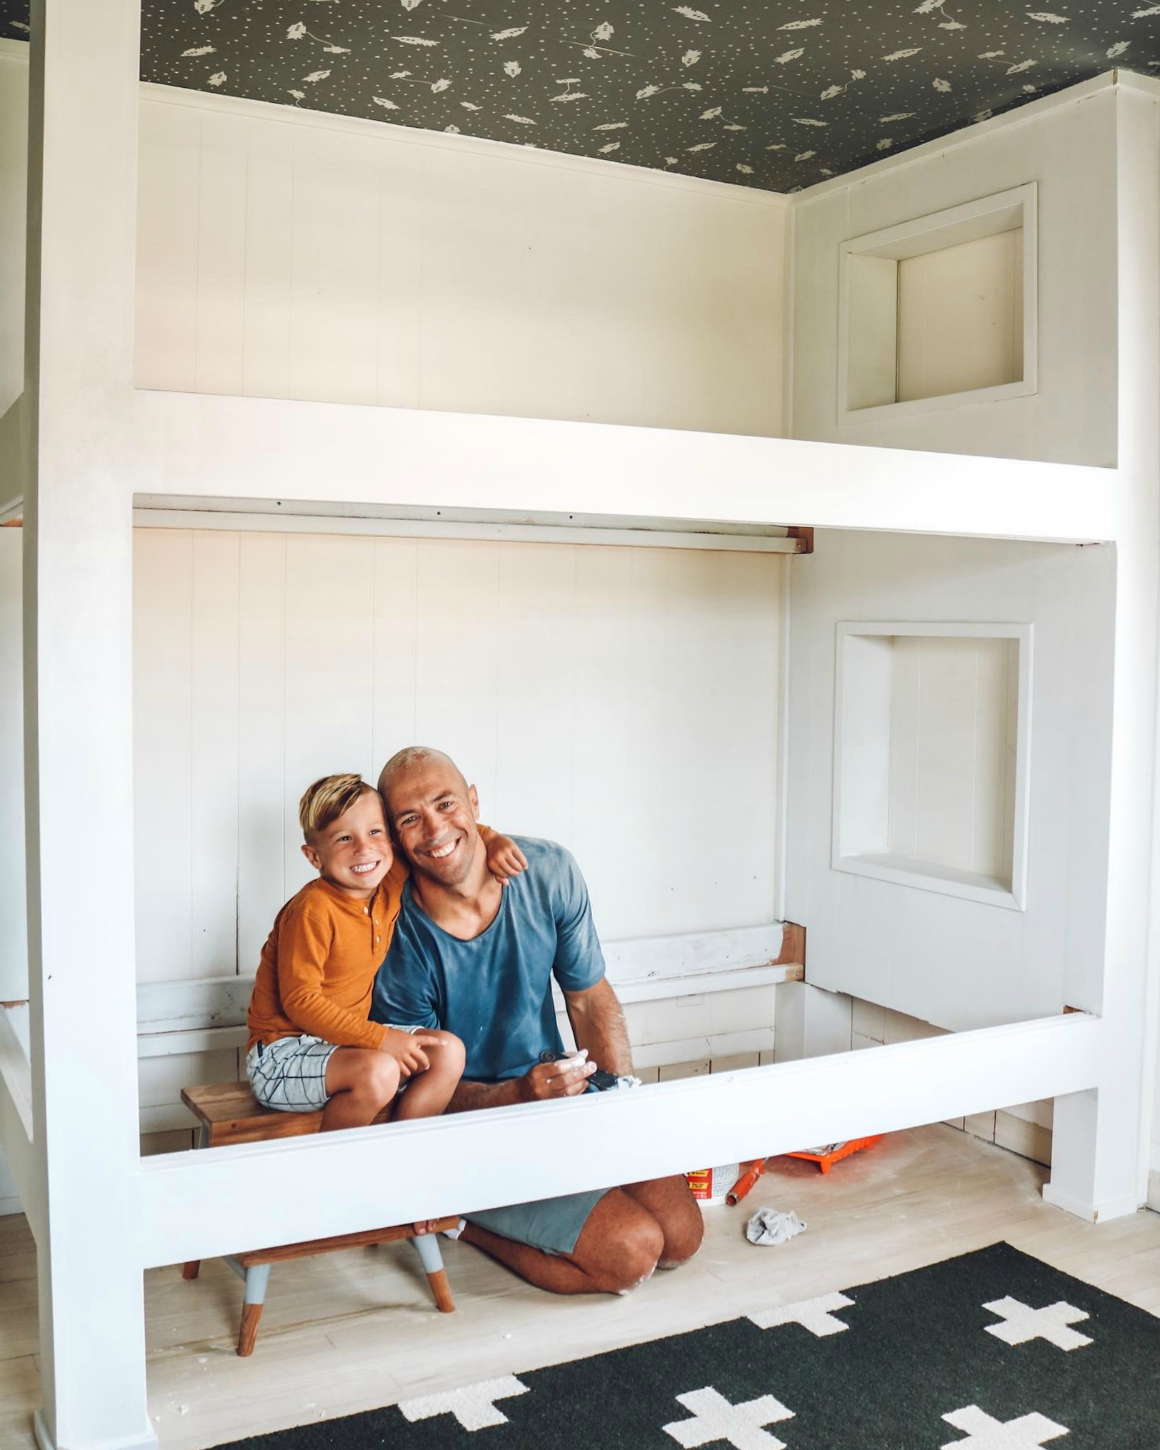 Built In Bunkbed Diy For 500 Nesting, How To Build A Bunk Bed